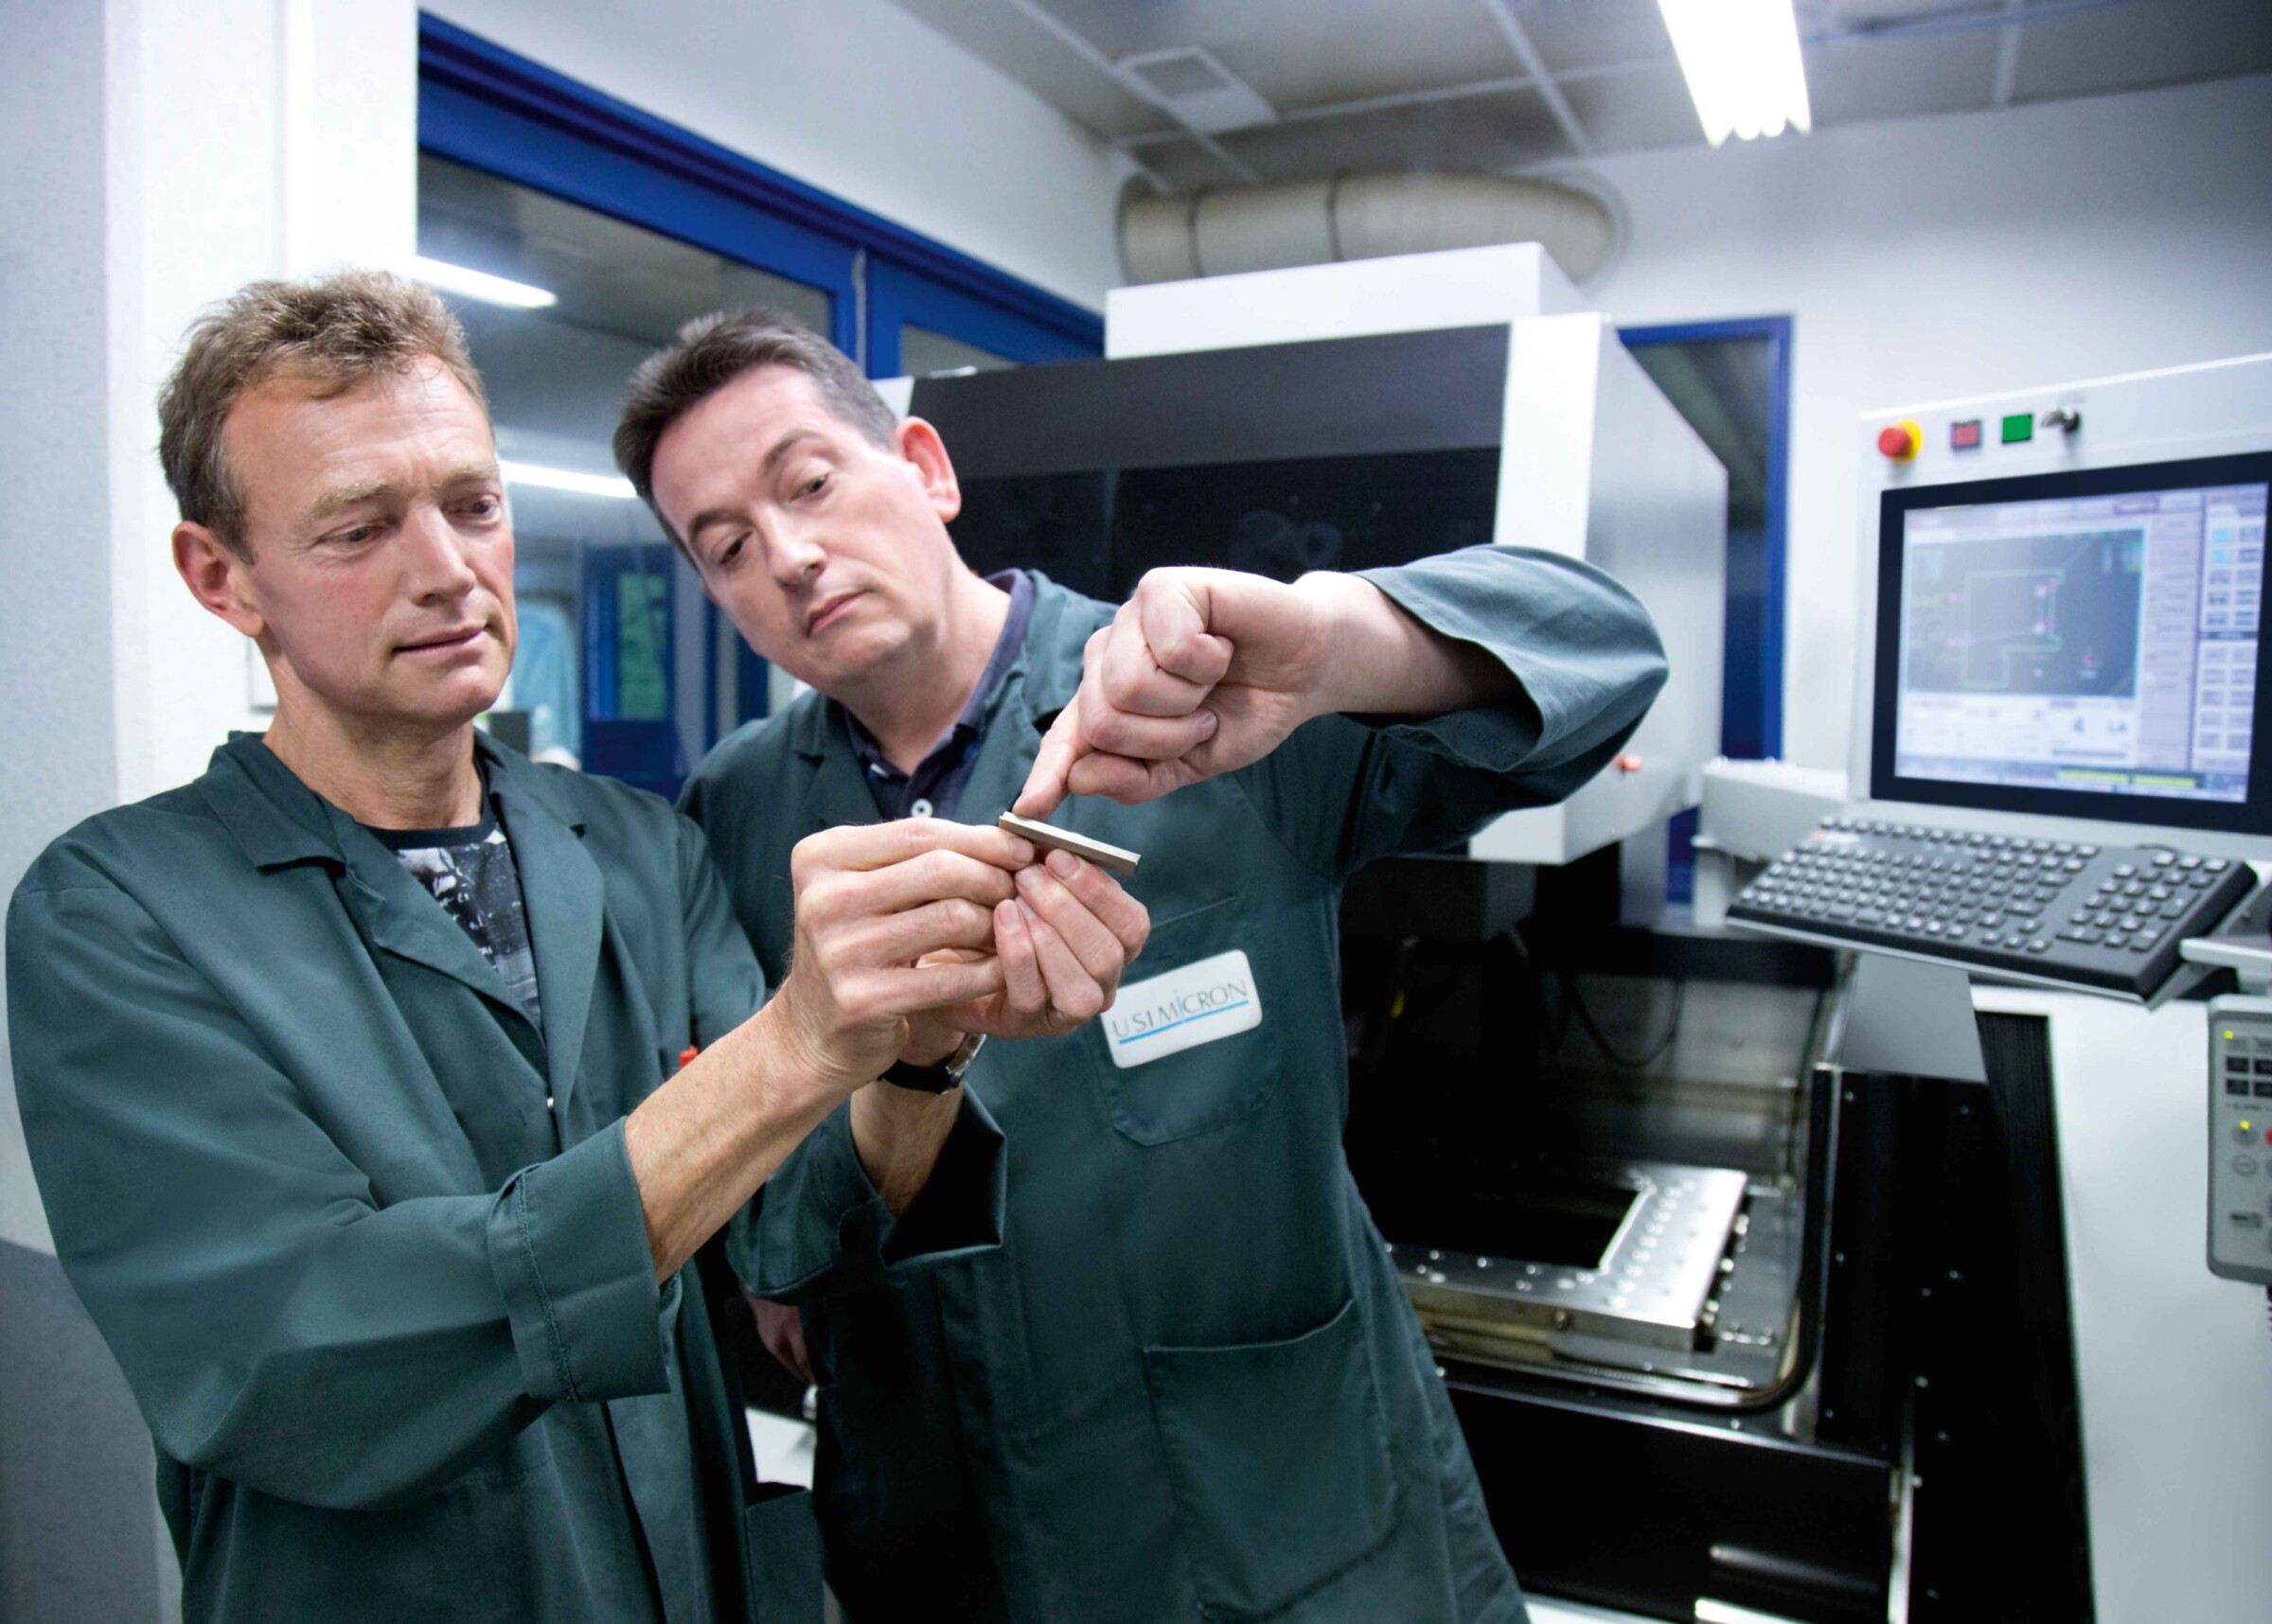 Alain Perrenoud, owner and Managing Director of USIMICRON in Besançon, and Sébastien Devernay, toolmaker and EDM and grinding specialist, checking the quality of the wire-cut components